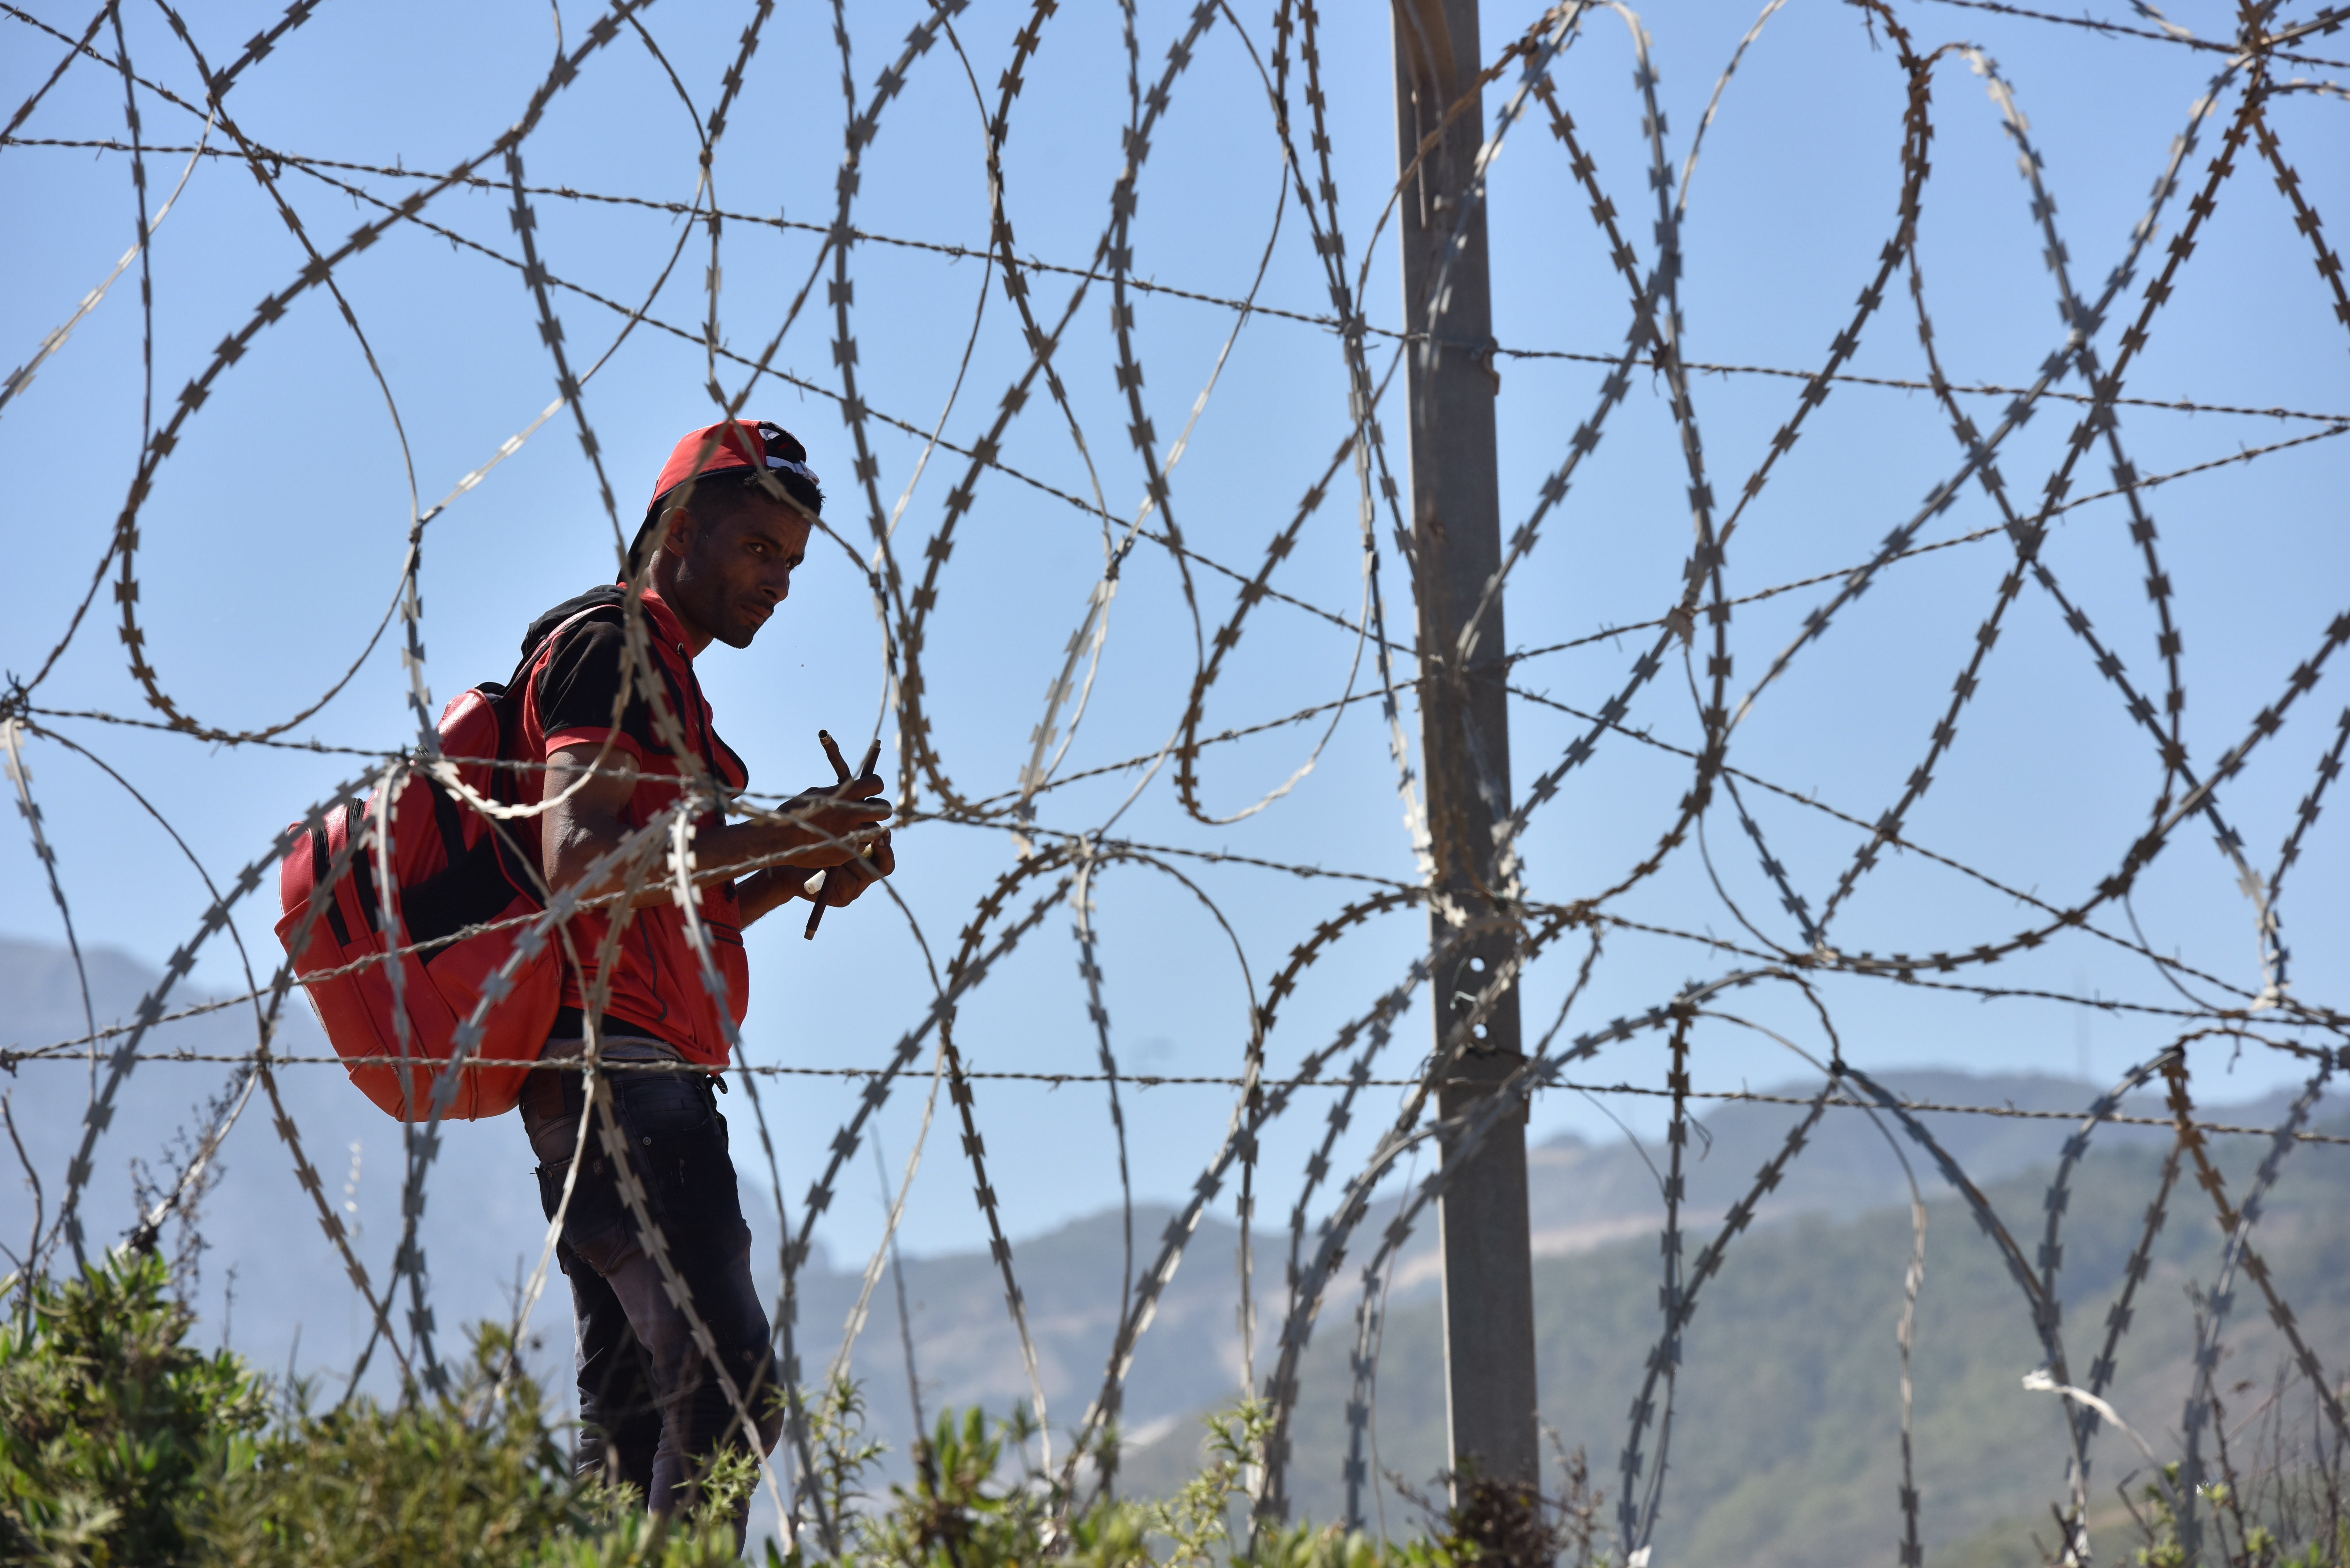 A migrant waits to sneak through the fence in the northern Morocco town of Fnideq in an attempt to cross the border to the Spanish enclave of Ceuta